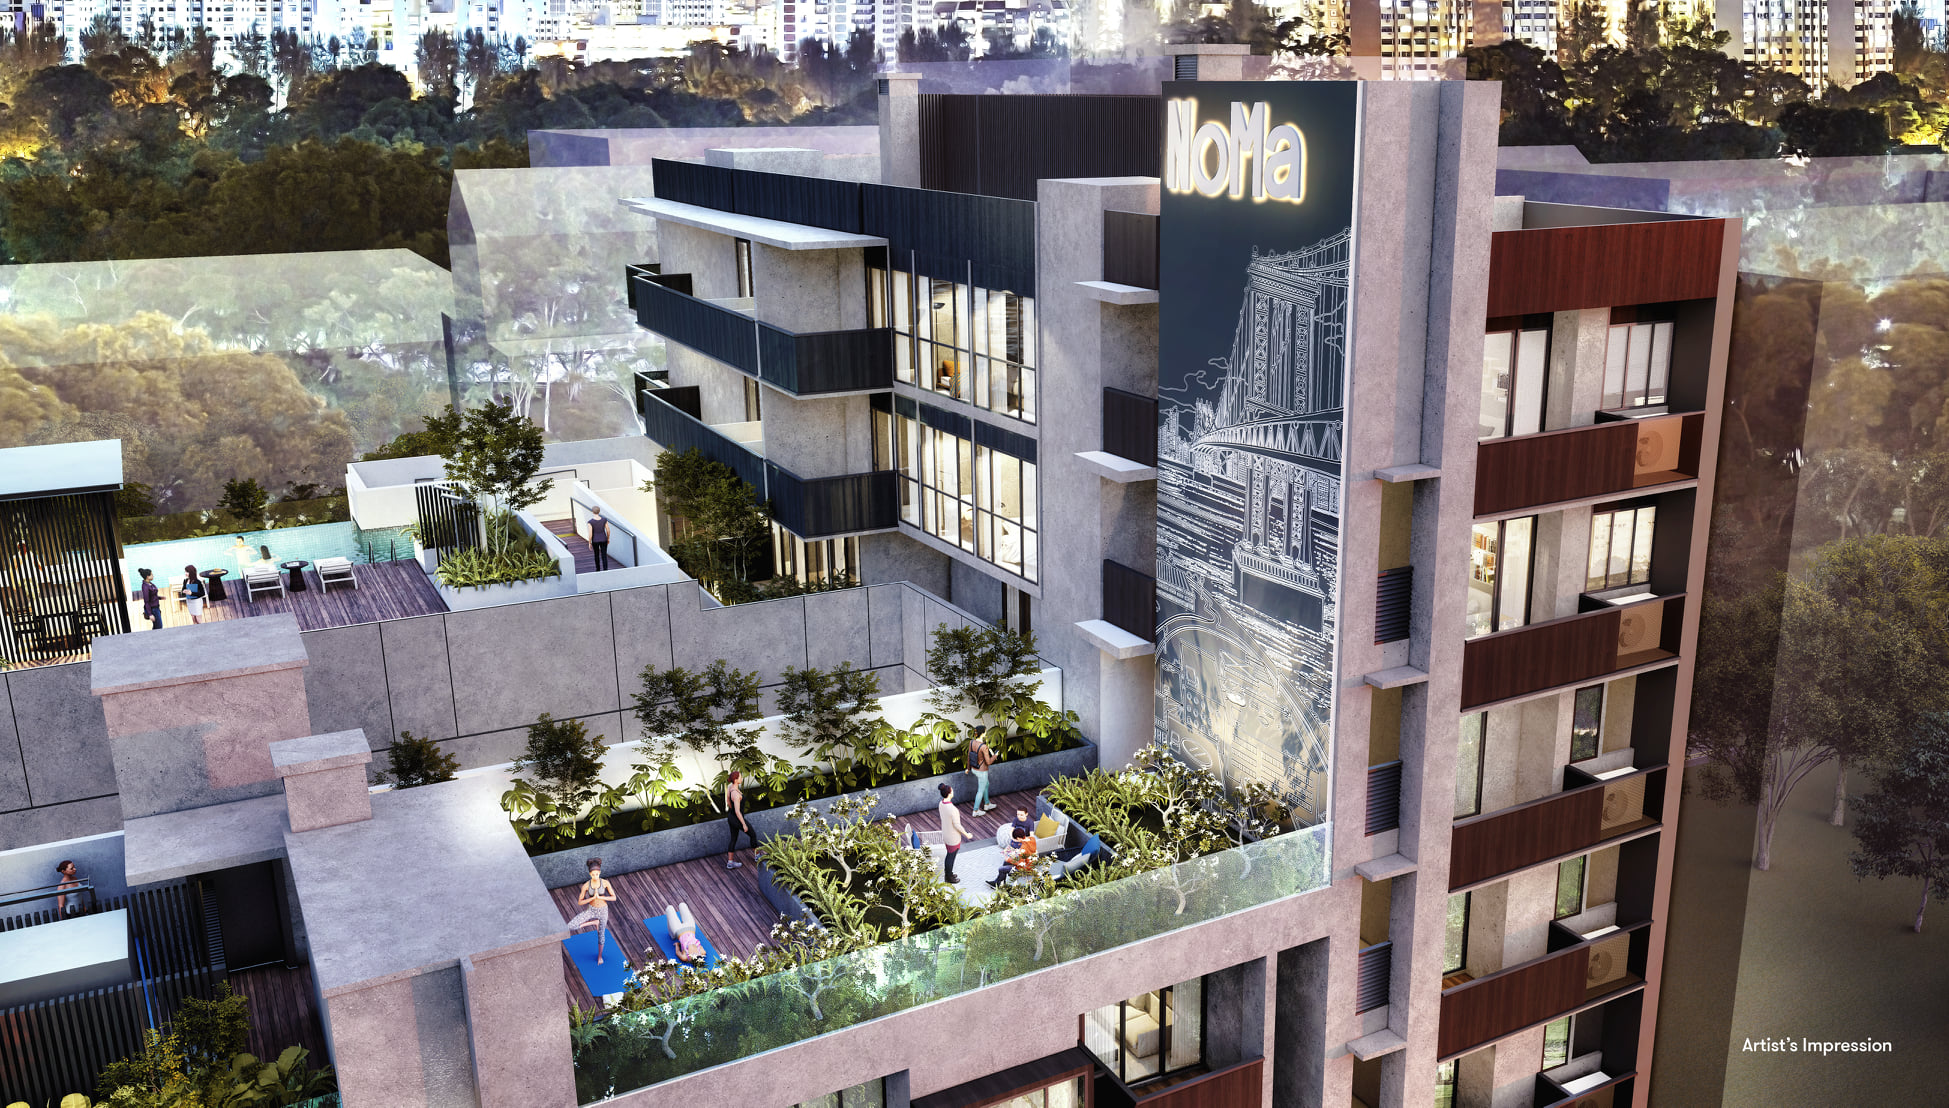 NoMa Condo Landscape design - Delivering dynamic, trend-leading amenities and a new nomadic experience.